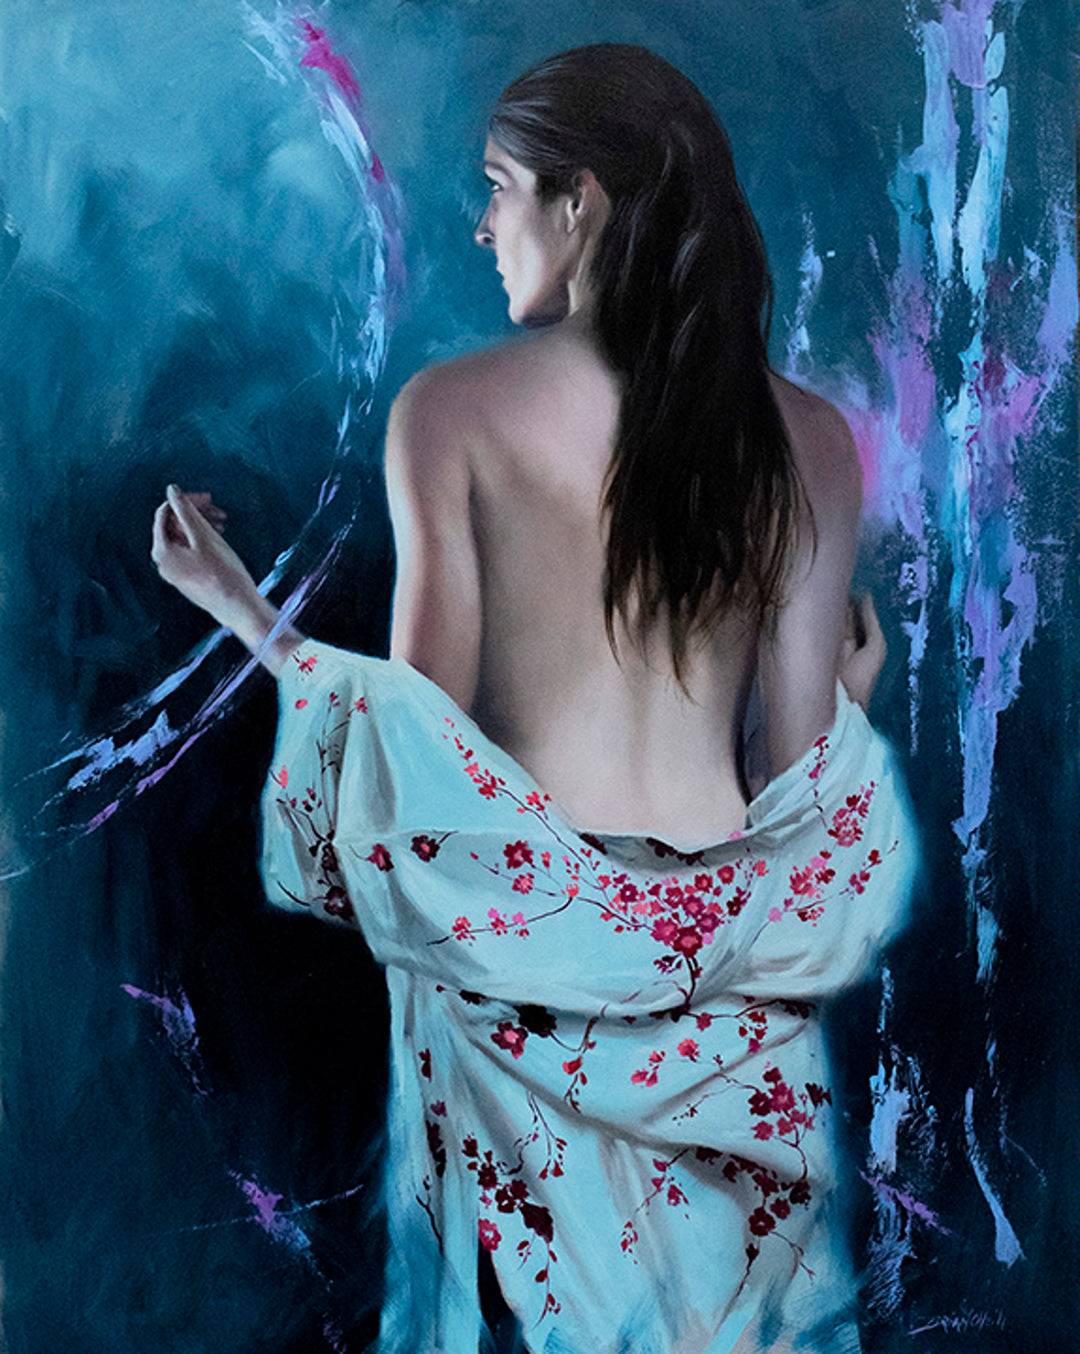 A breathtaking painting of a naked woman in a mesmerizing blue robe, created with skillful strokes of oil on panel called Brian O'Neill - "Moonlight" brand.